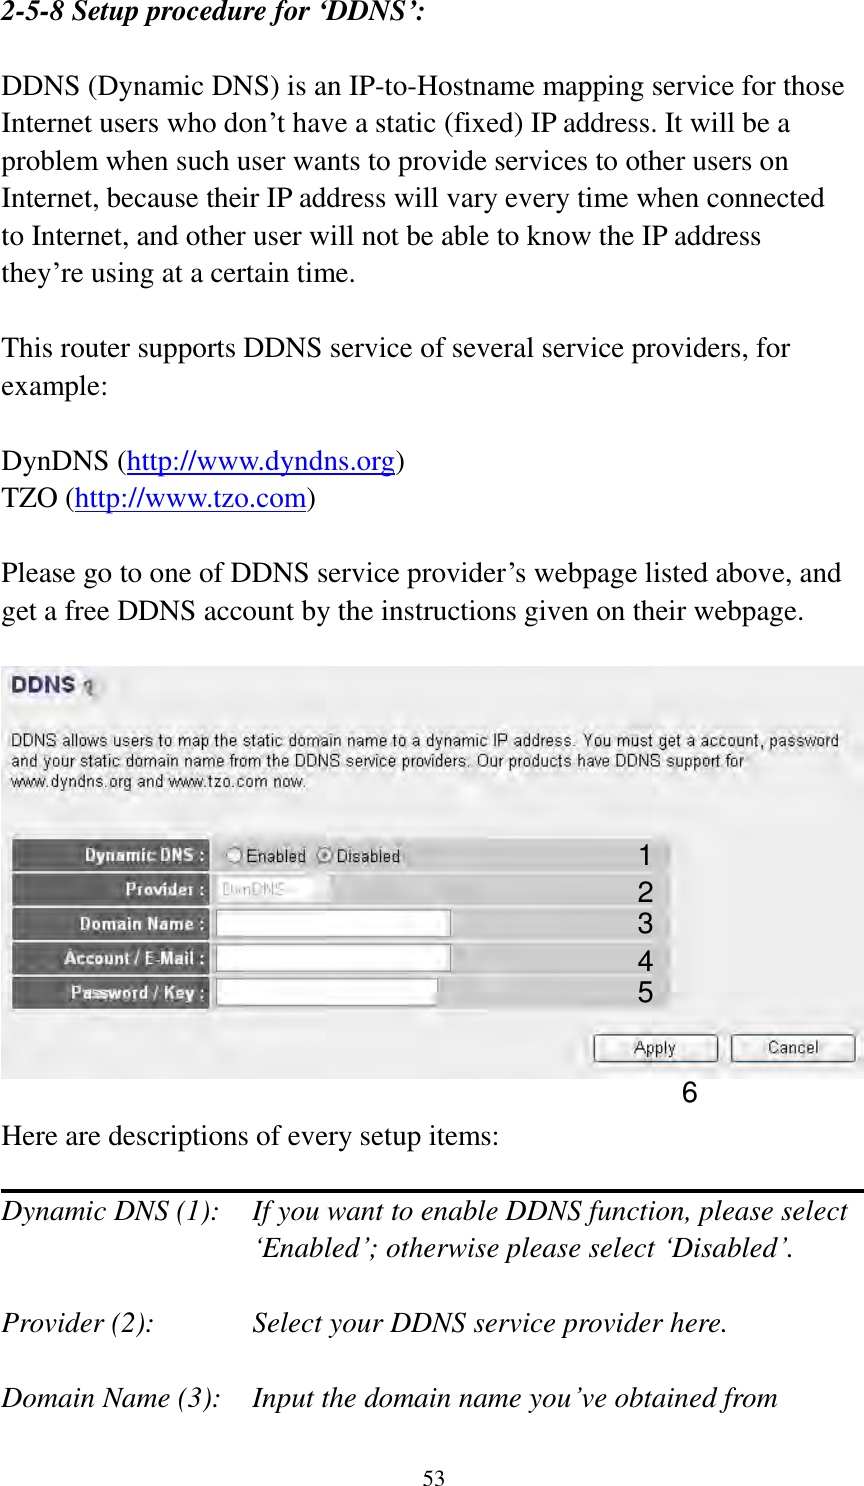 53 2-5-8 Setup procedure for ‘DDNS’:  DDNS (Dynamic DNS) is an IP-to-Hostname mapping service for those Internet users who don‟t have a static (fixed) IP address. It will be a problem when such user wants to provide services to other users on Internet, because their IP address will vary every time when connected to Internet, and other user will not be able to know the IP address they‟re using at a certain time.  This router supports DDNS service of several service providers, for example:  DynDNS (http://www.dyndns.org) TZO (http://www.tzo.com)  Please go to one of DDNS service provider‟s webpage listed above, and get a free DDNS account by the instructions given on their webpage.    Here are descriptions of every setup items:  Dynamic DNS (1):    If you want to enable DDNS function, please select „Enabled‟; otherwise please select „Disabled‟.  Provider (2):      Select your DDNS service provider here.  Domain Name (3):    Input the domain name you‟ve obtained from 1 2 3 4 5 6 